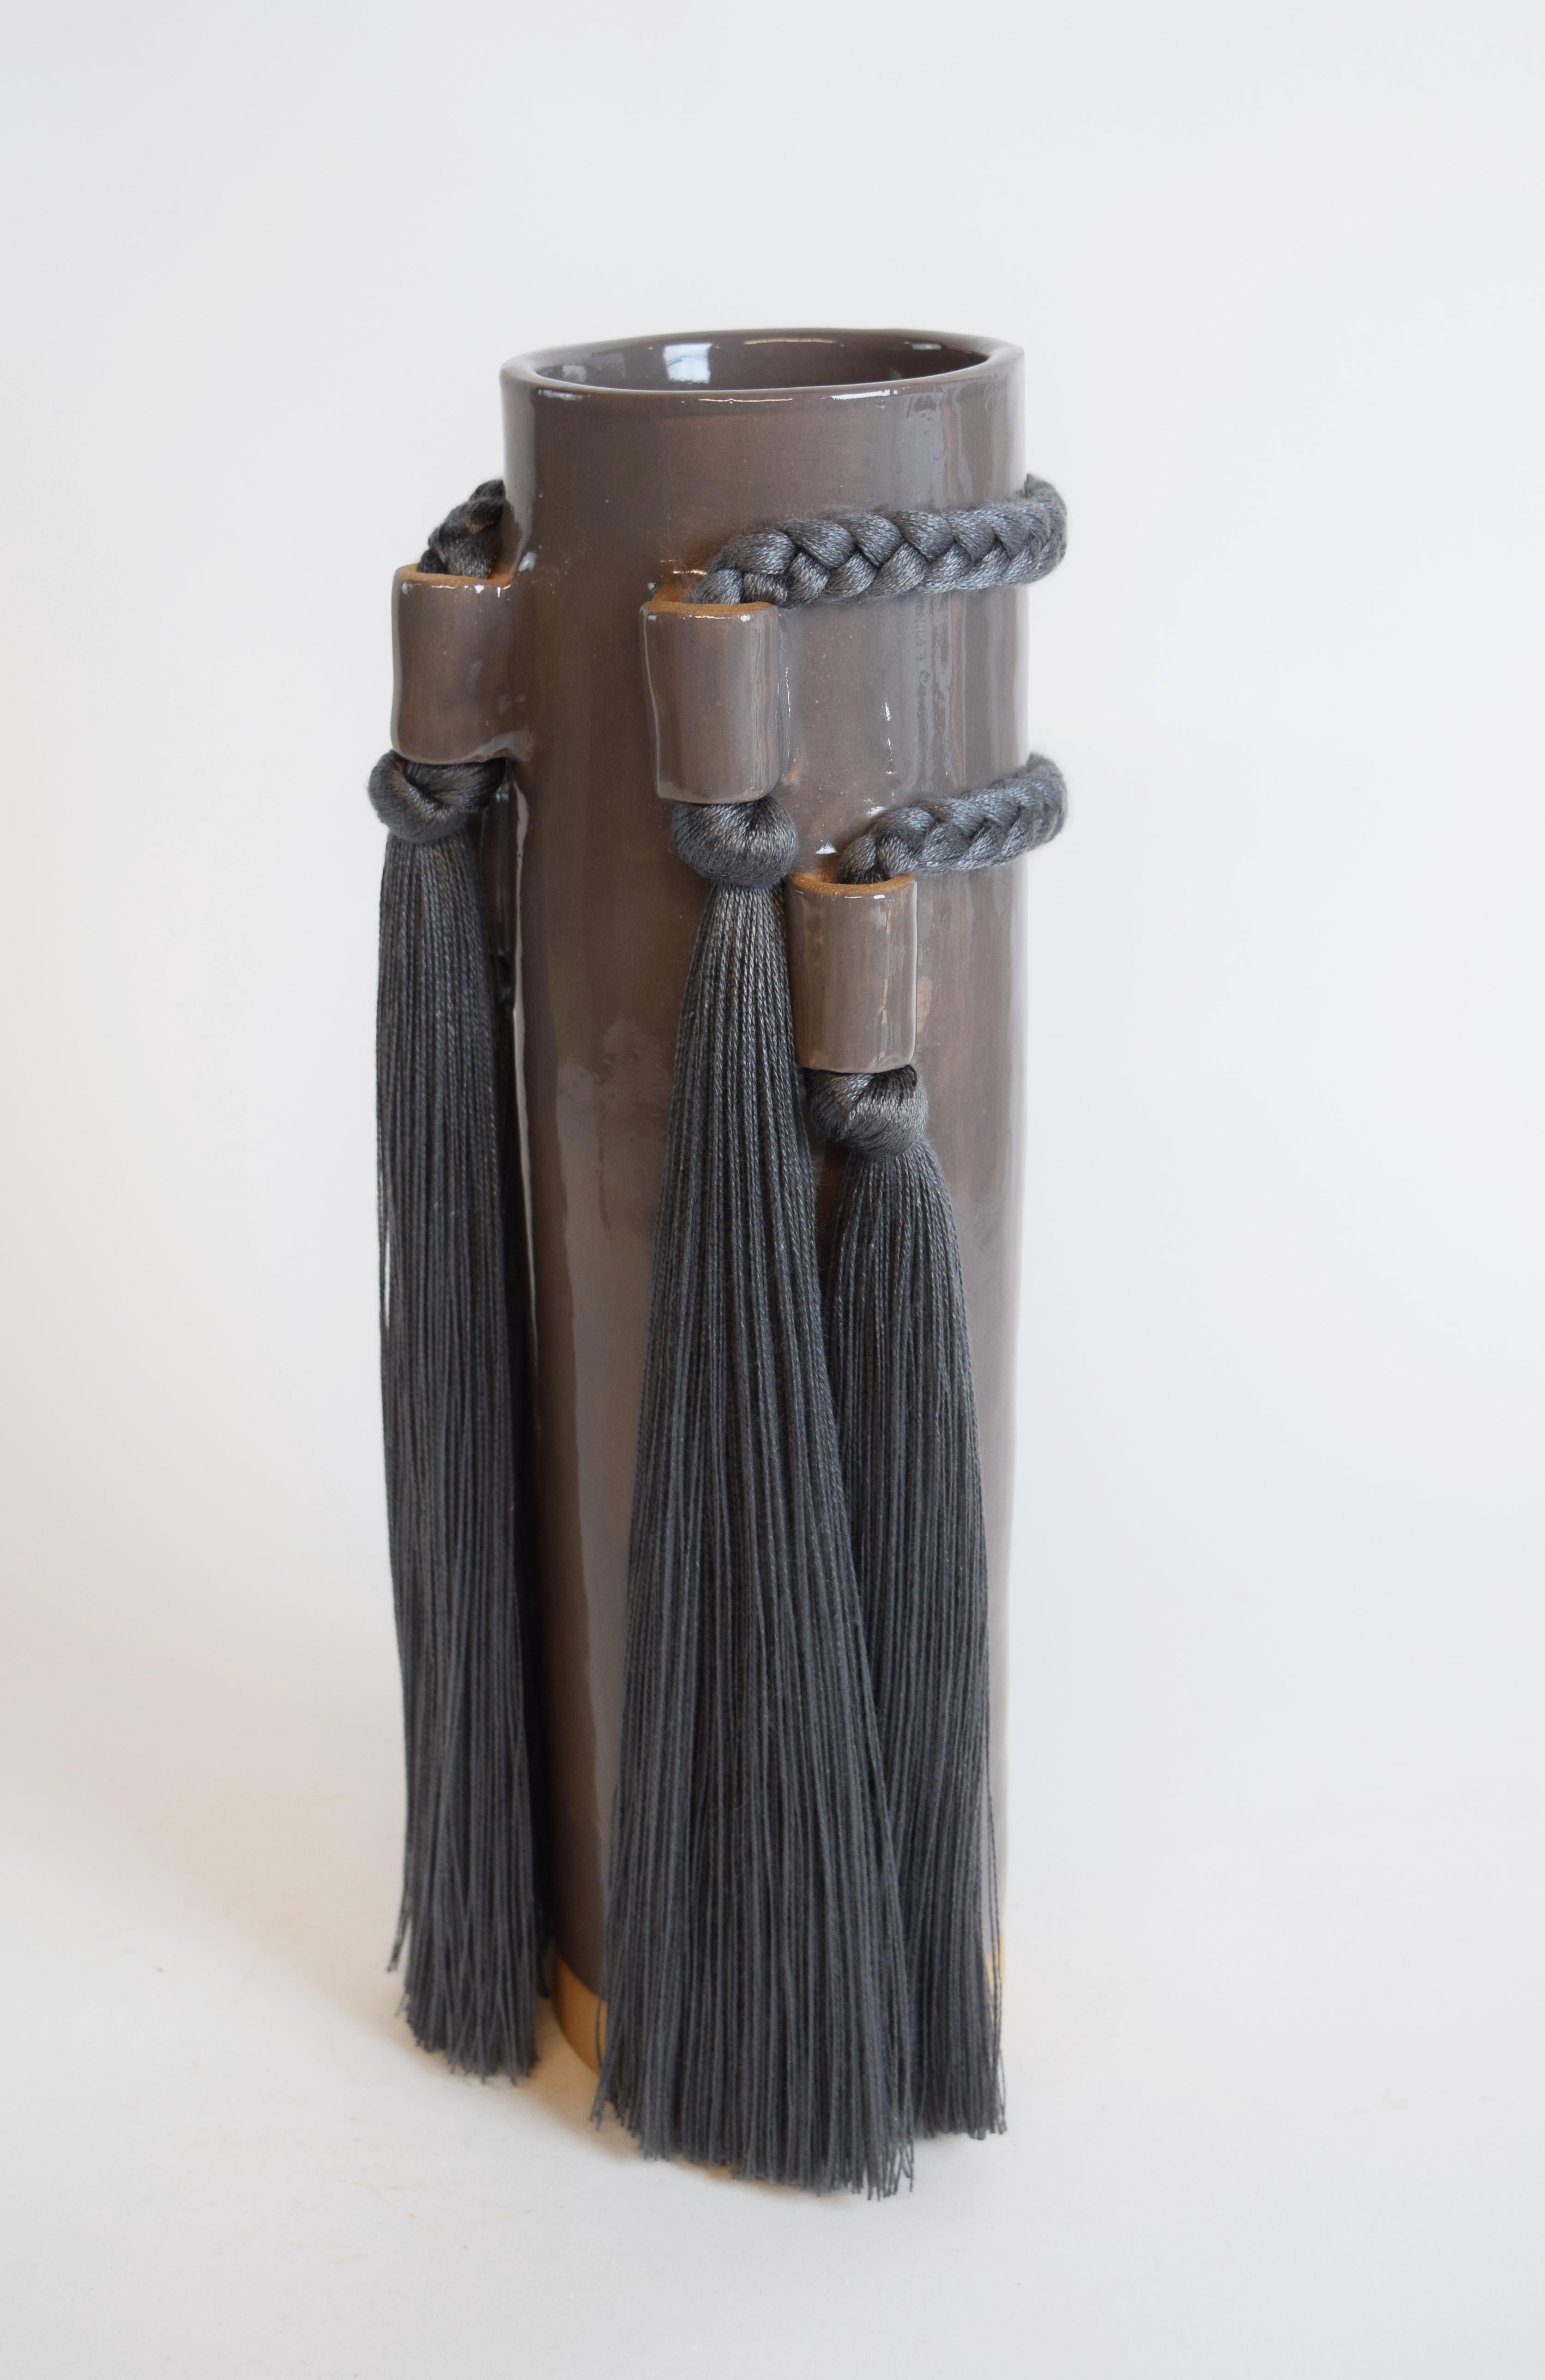 Hand-Crafted Handmade Ceramic Vase #735 in Charcoal with Tencel Braided & Fringe Details For Sale